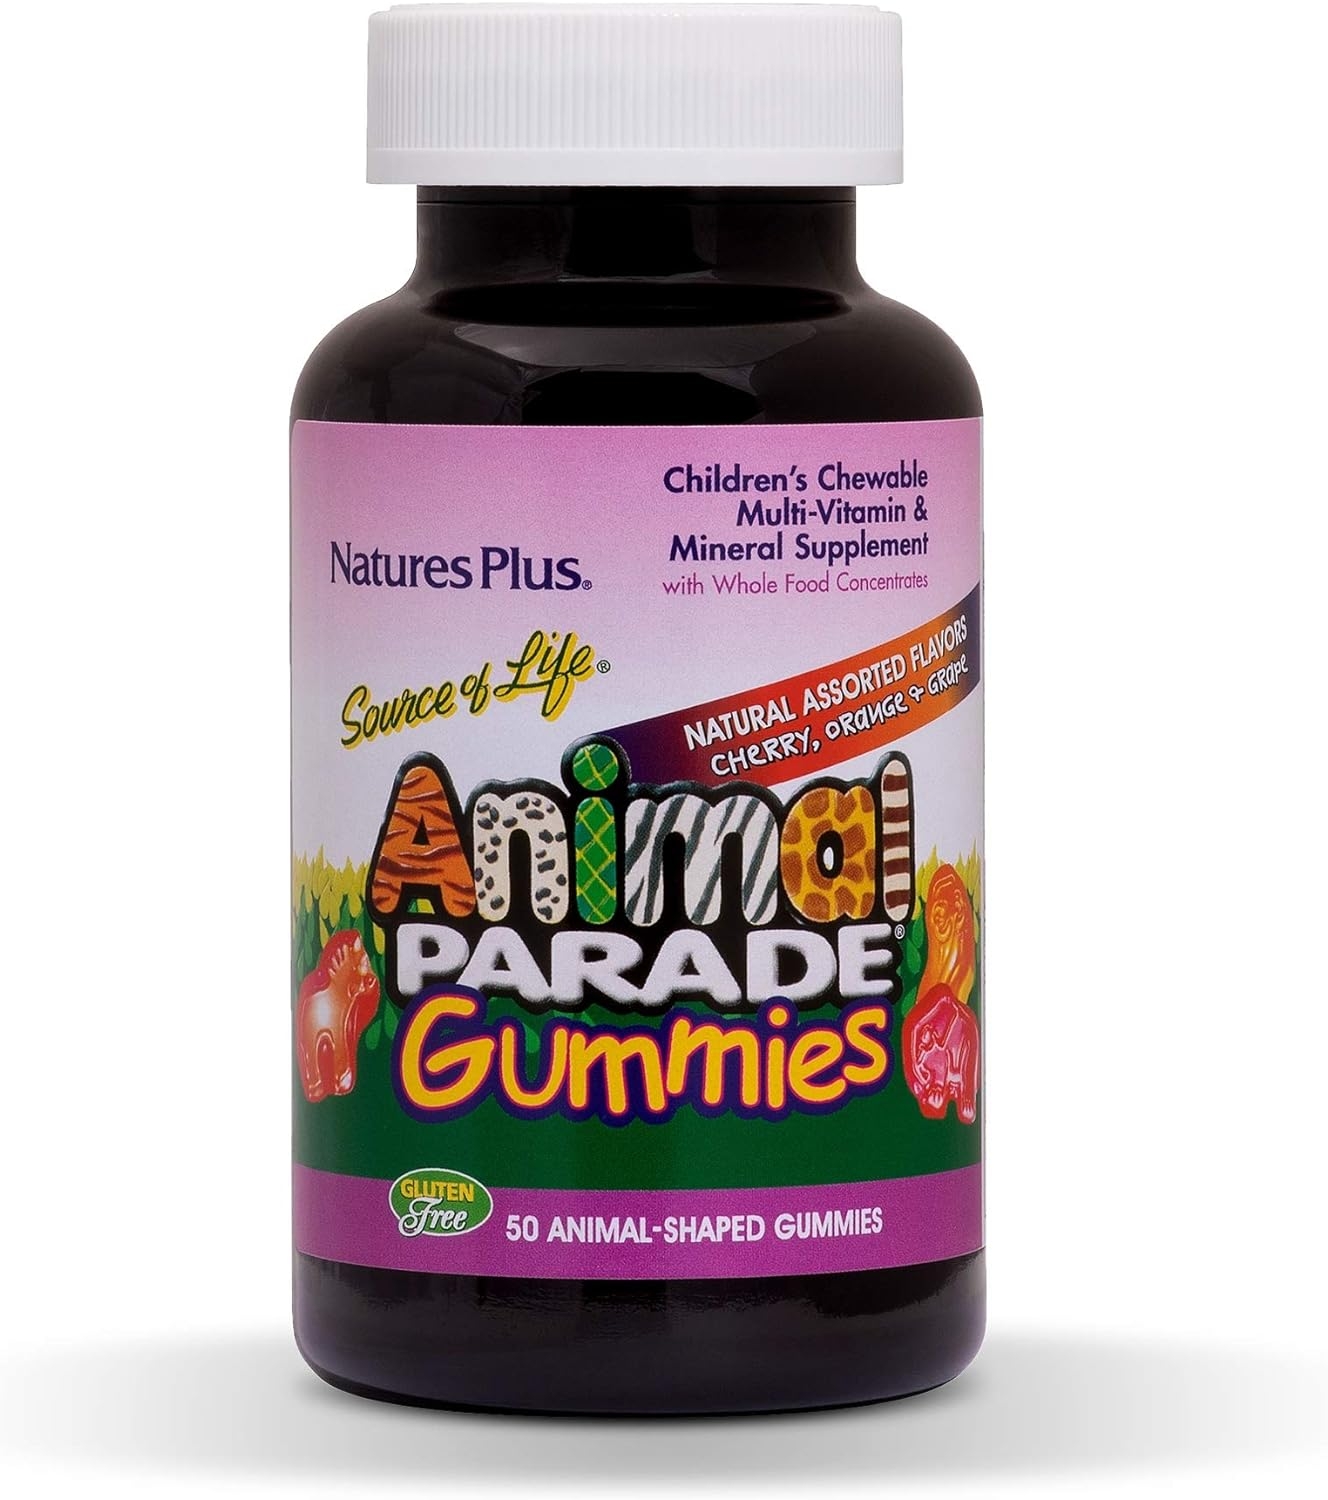 NaturesPlus Animal Parade Source of Life Children's Multivitamin Gummies - 50 Animal Shaped Gummies - Natural Assorted Flavors - Promotes Health and Wellbeing - Vegetarian, Gluten-Free - 25 Servings